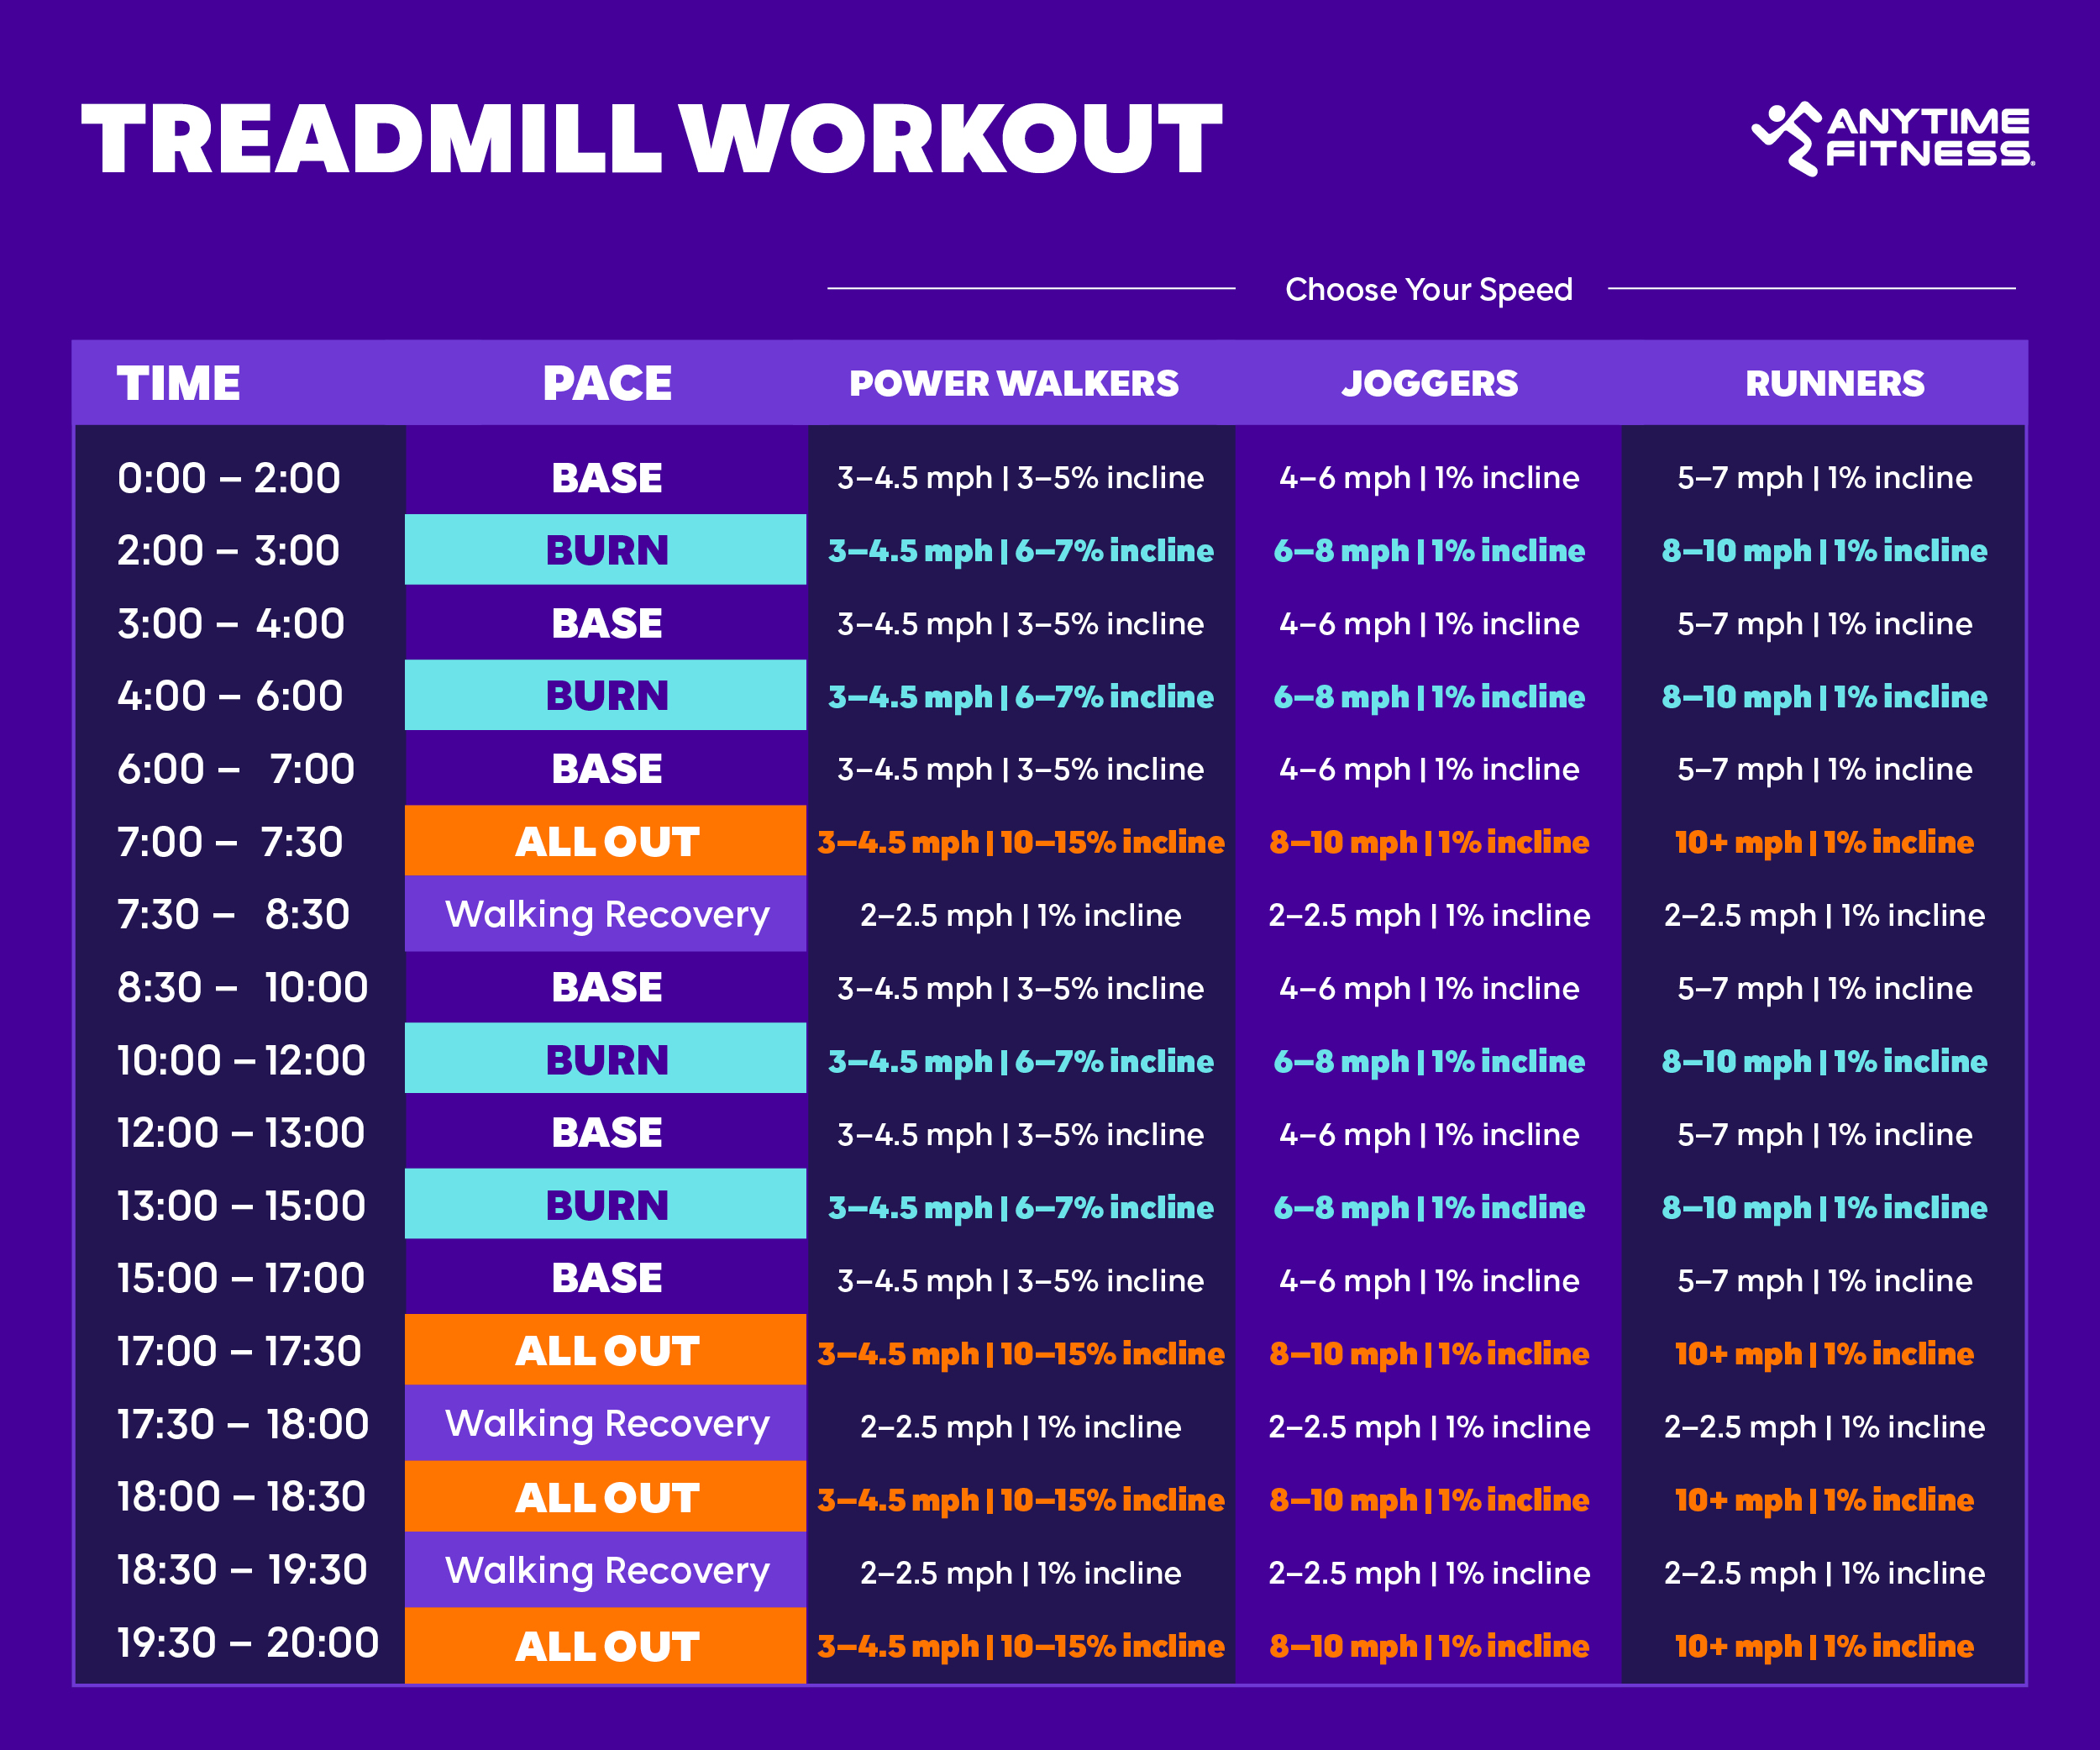 Anytime Fitness 30-minute treadmill workout chart featuring pace and speed guidelines for power walkers, joggers, and runners. Includes base, burn, all out, and walking recovery intervals.